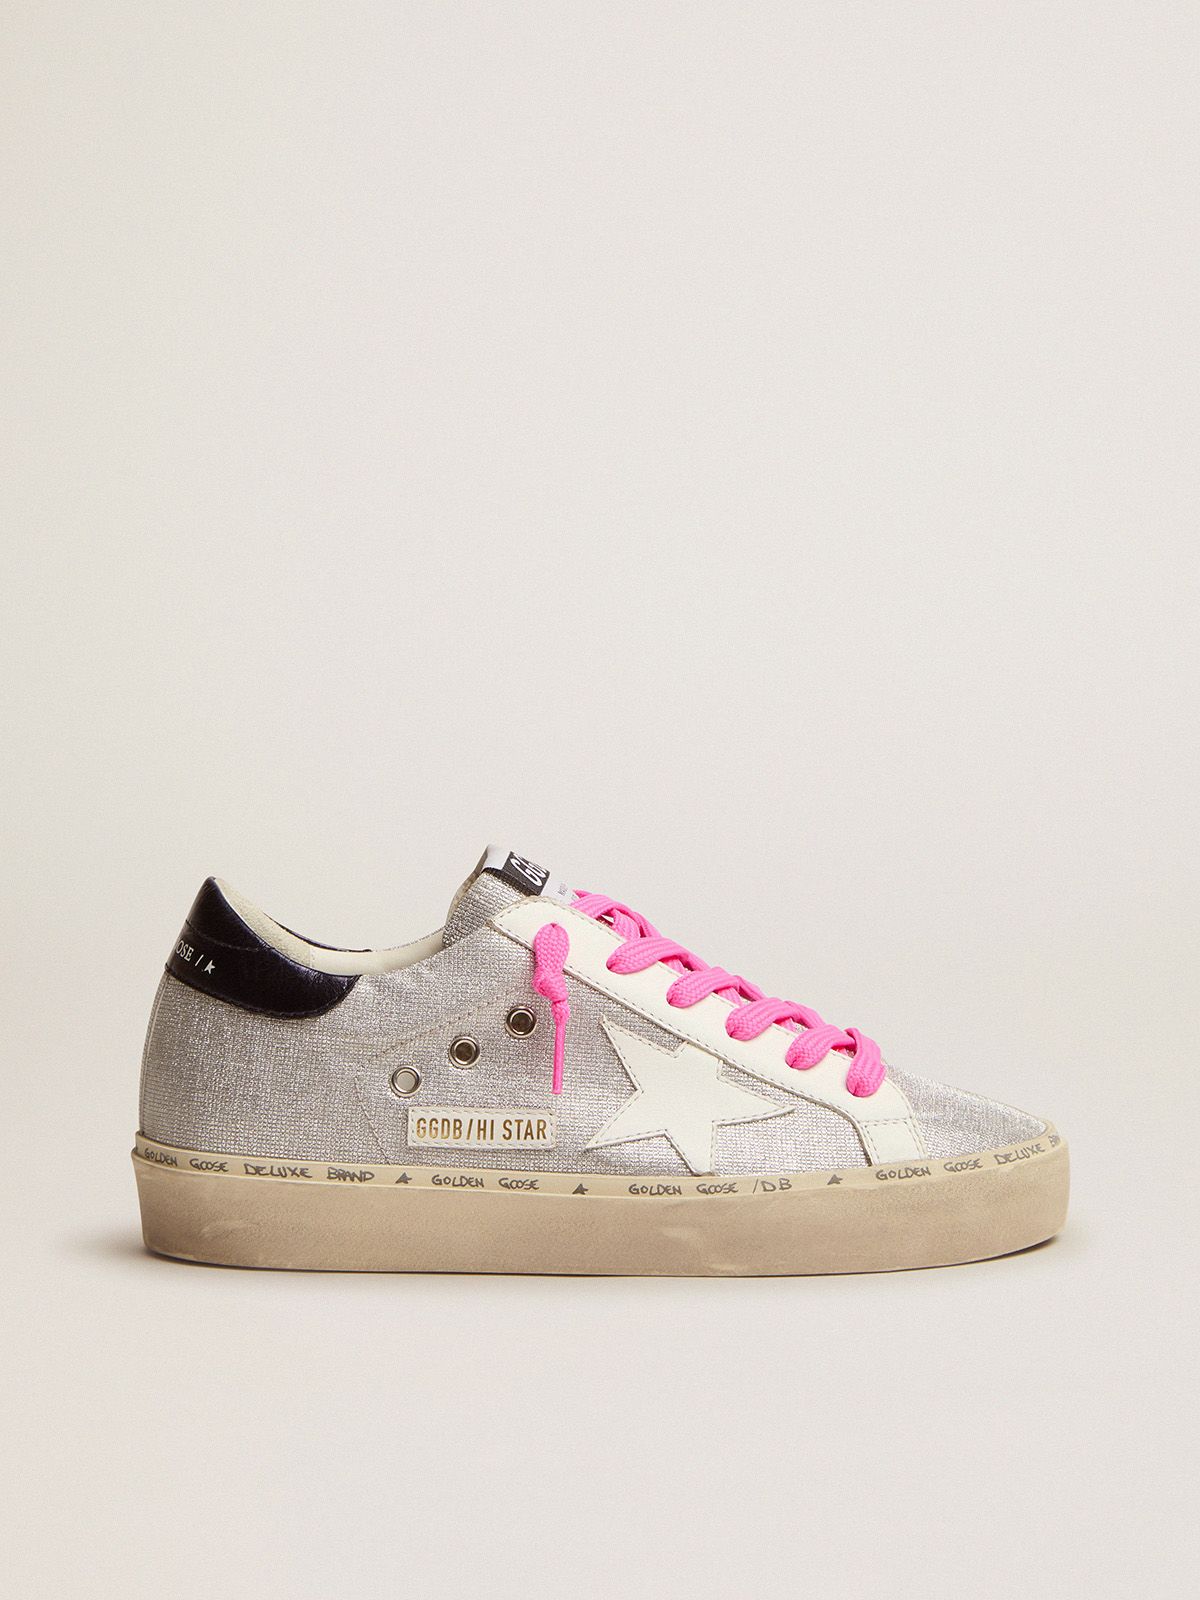 golden goose with Star star white leather pattern sneakers Hi and in silver checkered glitter